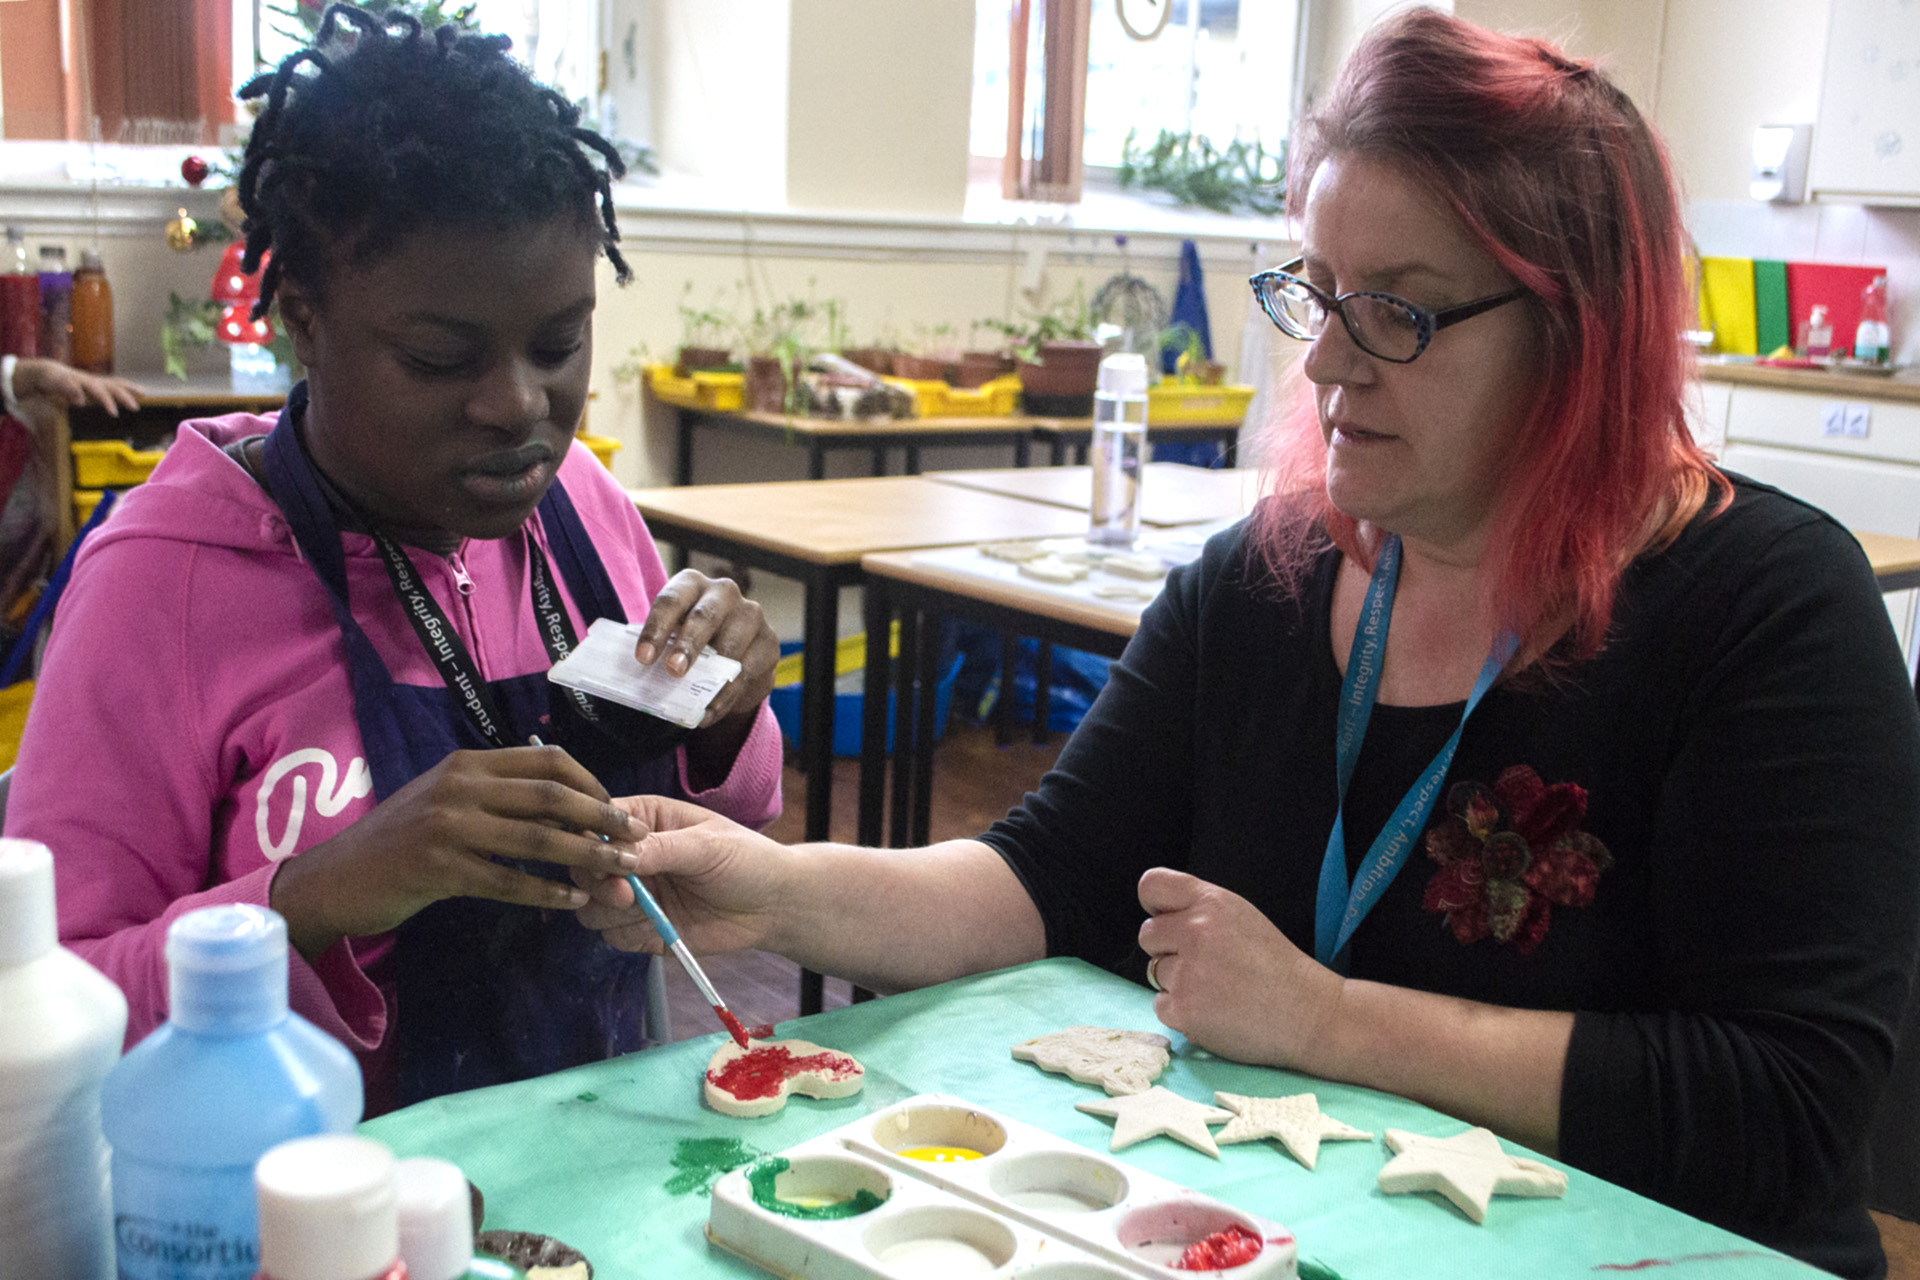 Tutor and Student using art and craft materials